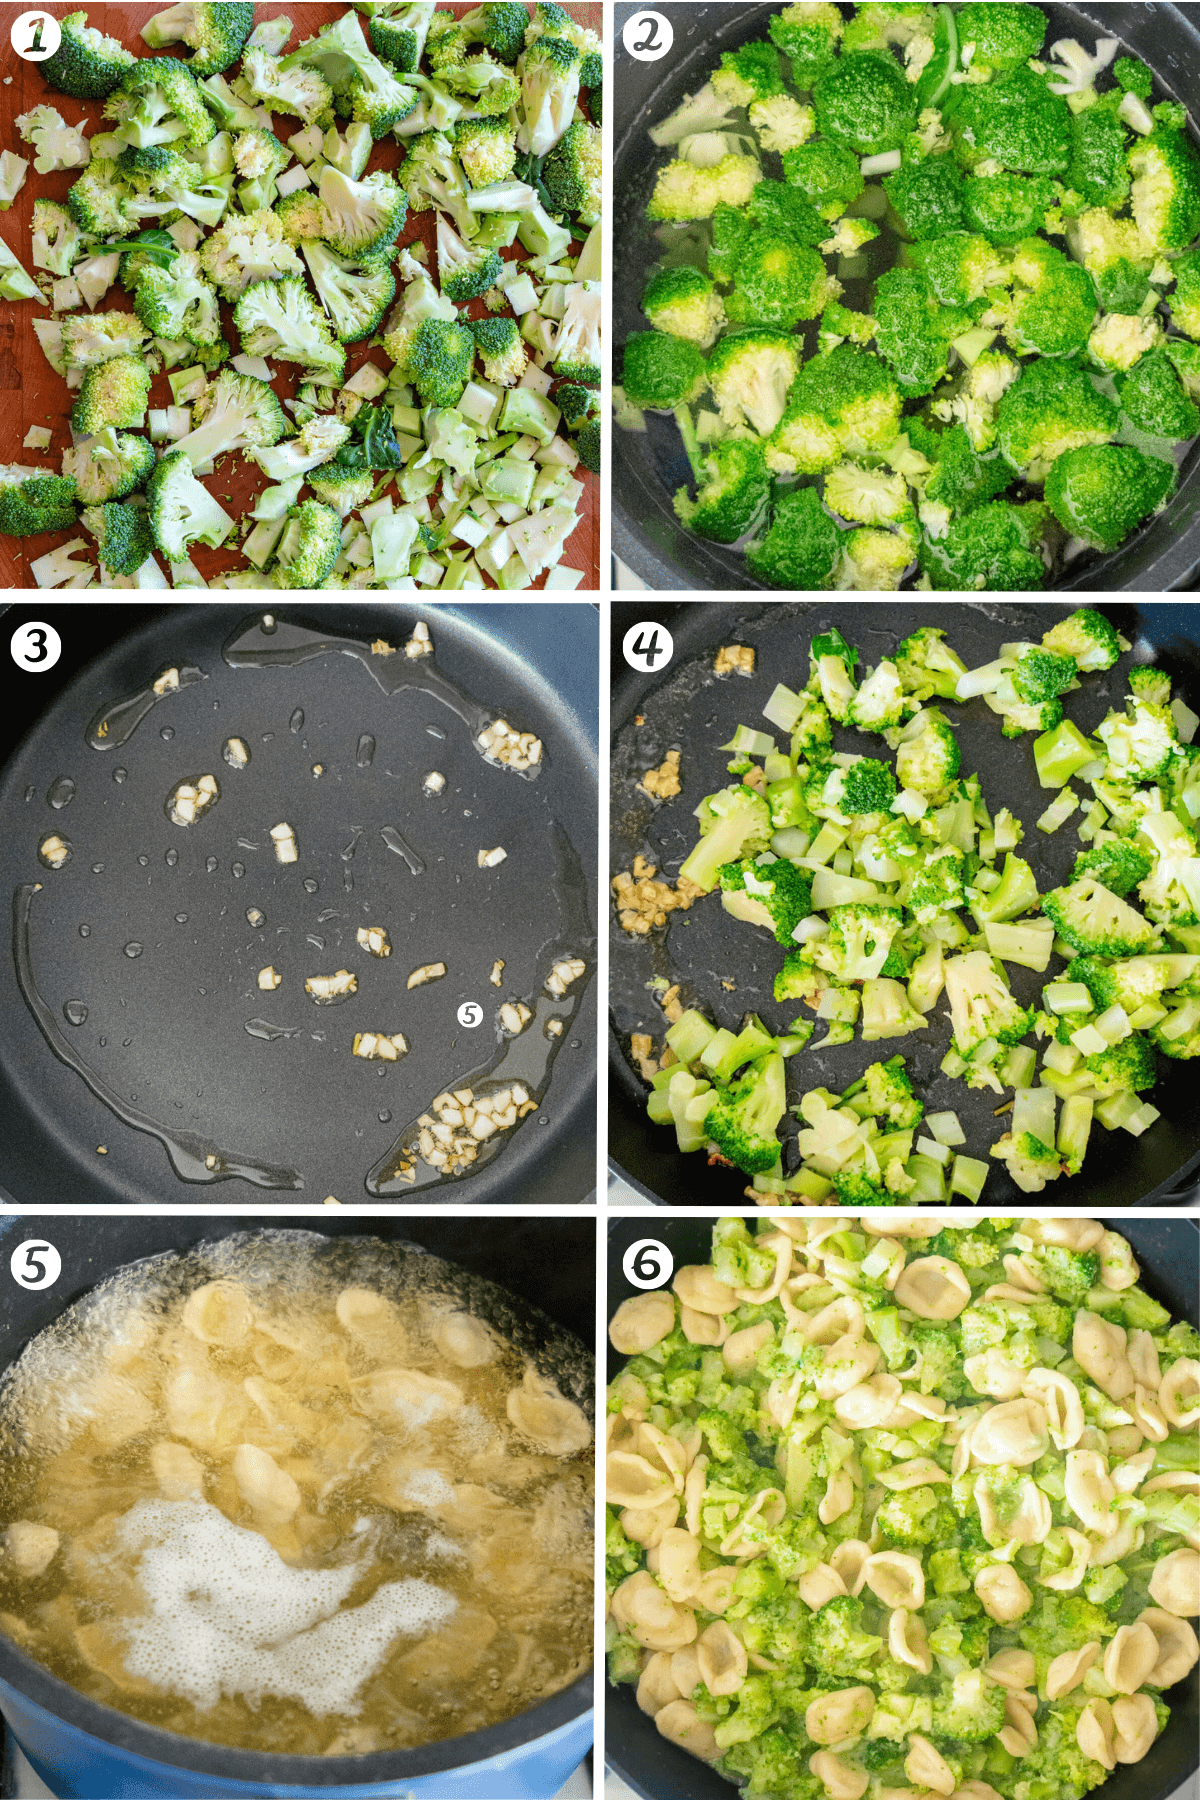 Steps on how to make Broccoli pasta